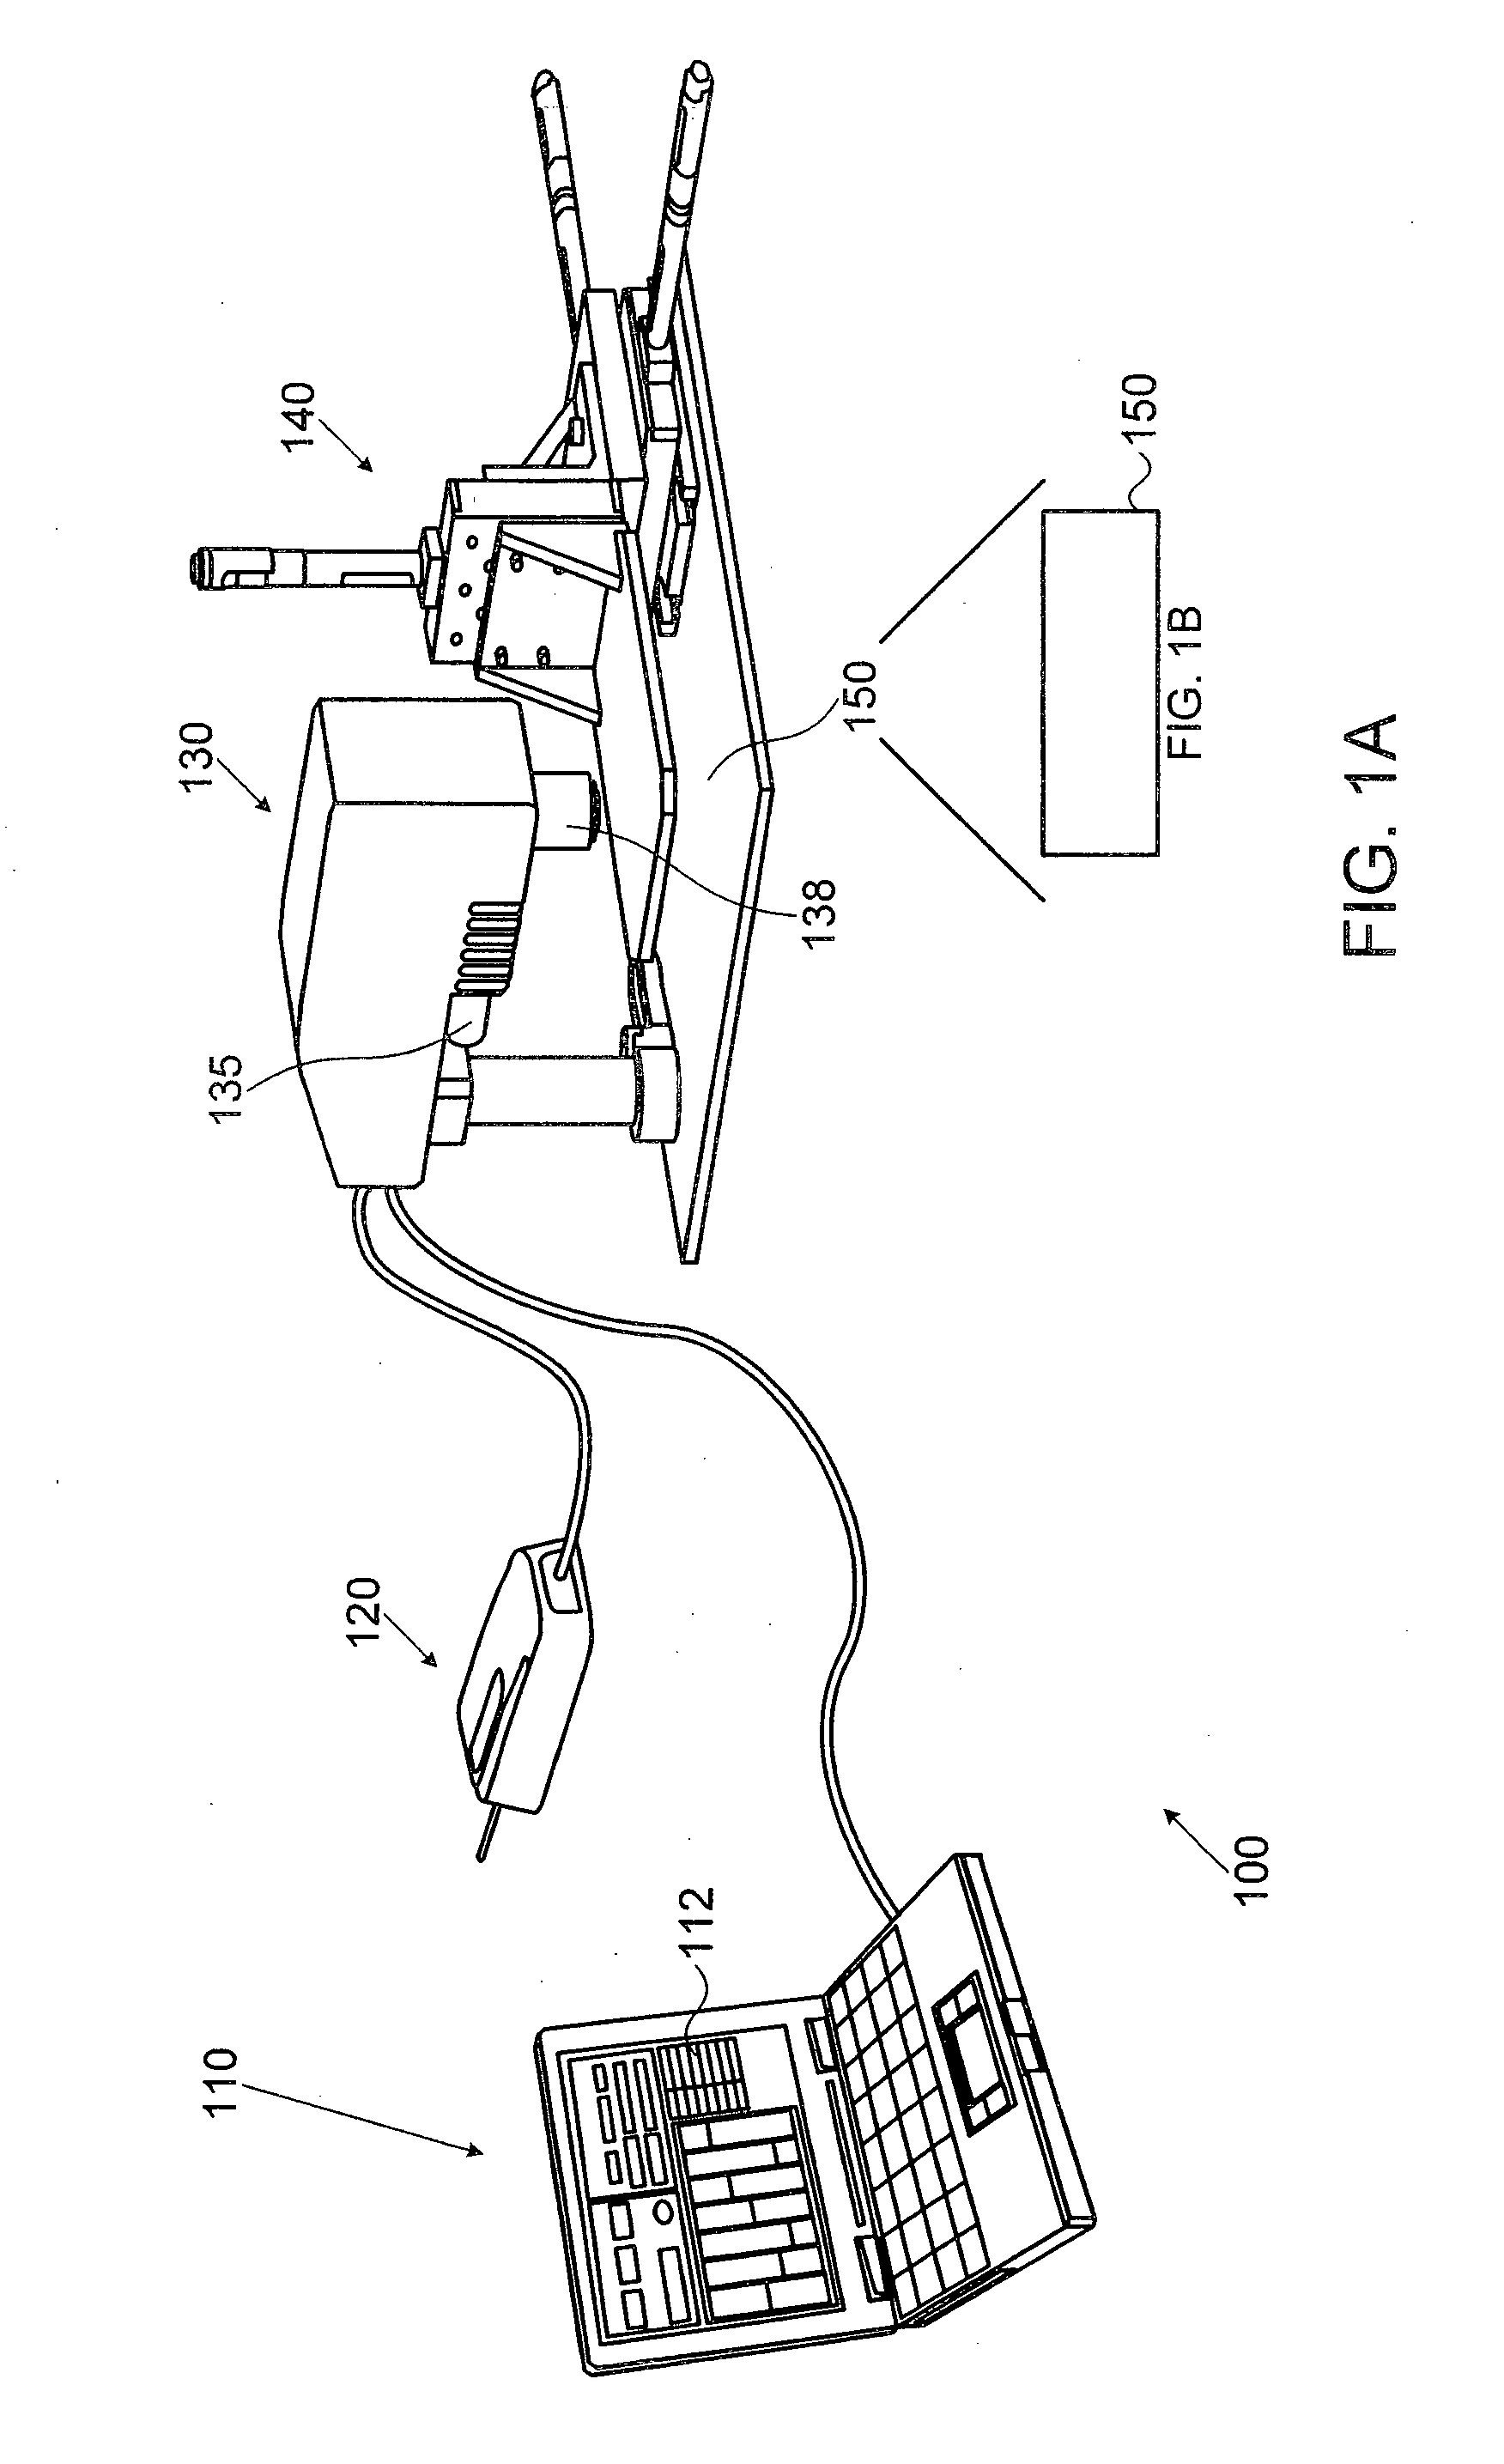 Device, system and method for rapid determination of a medical condition